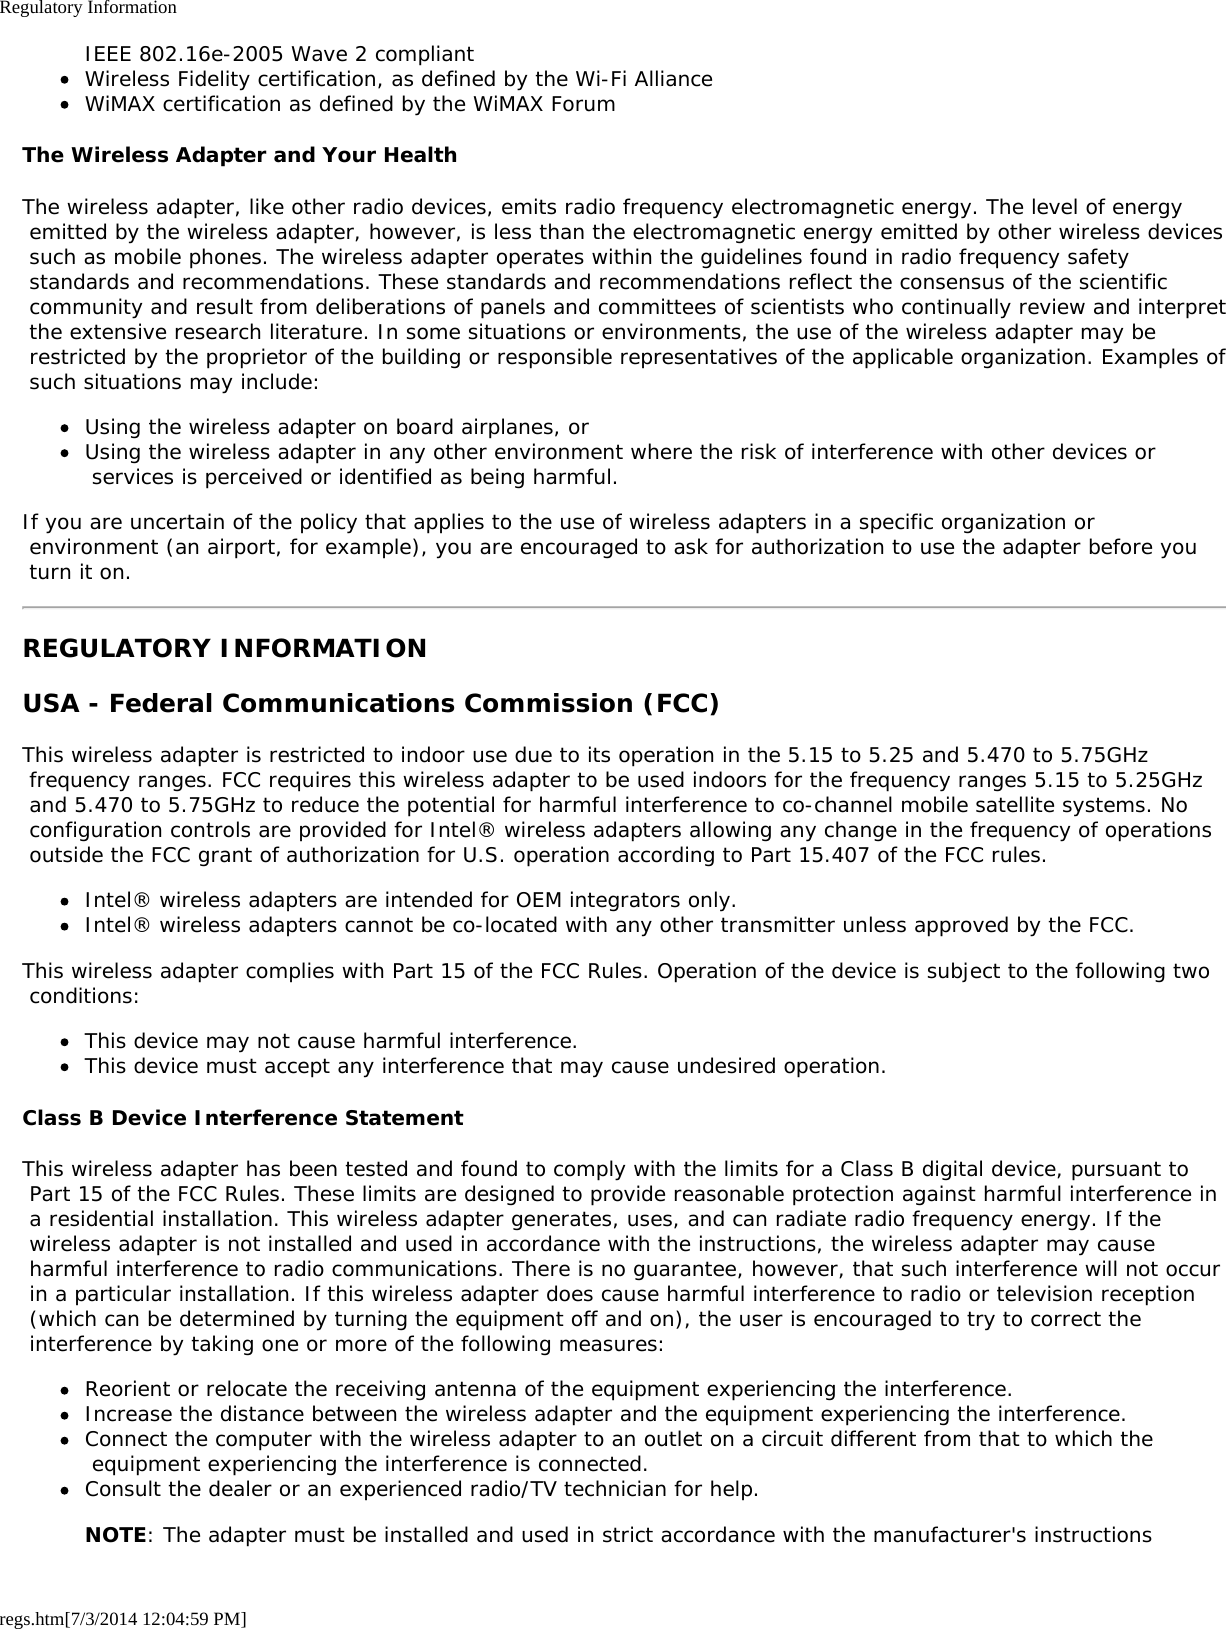 Regulatory Informationregs.htm[7/3/2014 12:04:59 PM]IEEE 802.16e-2005 Wave 2 compliantWireless Fidelity certification, as defined by the Wi-Fi AllianceWiMAX certification as defined by the WiMAX ForumThe Wireless Adapter and Your HealthThe wireless adapter, like other radio devices, emits radio frequency electromagnetic energy. The level of energy emitted by the wireless adapter, however, is less than the electromagnetic energy emitted by other wireless devices such as mobile phones. The wireless adapter operates within the guidelines found in radio frequency safety standards and recommendations. These standards and recommendations reflect the consensus of the scientific community and result from deliberations of panels and committees of scientists who continually review and interpret the extensive research literature. In some situations or environments, the use of the wireless adapter may be restricted by the proprietor of the building or responsible representatives of the applicable organization. Examples of such situations may include:Using the wireless adapter on board airplanes, orUsing the wireless adapter in any other environment where the risk of interference with other devices or services is perceived or identified as being harmful.If you are uncertain of the policy that applies to the use of wireless adapters in a specific organization or environment (an airport, for example), you are encouraged to ask for authorization to use the adapter before you turn it on.REGULATORY INFORMATIONUSA - Federal Communications Commission (FCC)This wireless adapter is restricted to indoor use due to its operation in the 5.15 to 5.25 and 5.470 to 5.75GHz frequency ranges. FCC requires this wireless adapter to be used indoors for the frequency ranges 5.15 to 5.25GHz and 5.470 to 5.75GHz to reduce the potential for harmful interference to co-channel mobile satellite systems. No configuration controls are provided for Intel® wireless adapters allowing any change in the frequency of operations outside the FCC grant of authorization for U.S. operation according to Part 15.407 of the FCC rules.Intel® wireless adapters are intended for OEM integrators only.Intel® wireless adapters cannot be co-located with any other transmitter unless approved by the FCC.This wireless adapter complies with Part 15 of the FCC Rules. Operation of the device is subject to the following two conditions:This device may not cause harmful interference.This device must accept any interference that may cause undesired operation.Class B Device Interference StatementThis wireless adapter has been tested and found to comply with the limits for a Class B digital device, pursuant to Part 15 of the FCC Rules. These limits are designed to provide reasonable protection against harmful interference in a residential installation. This wireless adapter generates, uses, and can radiate radio frequency energy. If the wireless adapter is not installed and used in accordance with the instructions, the wireless adapter may cause harmful interference to radio communications. There is no guarantee, however, that such interference will not occur in a particular installation. If this wireless adapter does cause harmful interference to radio or television reception (which can be determined by turning the equipment off and on), the user is encouraged to try to correct the interference by taking one or more of the following measures:Reorient or relocate the receiving antenna of the equipment experiencing the interference.Increase the distance between the wireless adapter and the equipment experiencing the interference.Connect the computer with the wireless adapter to an outlet on a circuit different from that to which the equipment experiencing the interference is connected.Consult the dealer or an experienced radio/TV technician for help.NOTE: The adapter must be installed and used in strict accordance with the manufacturer&apos;s instructions